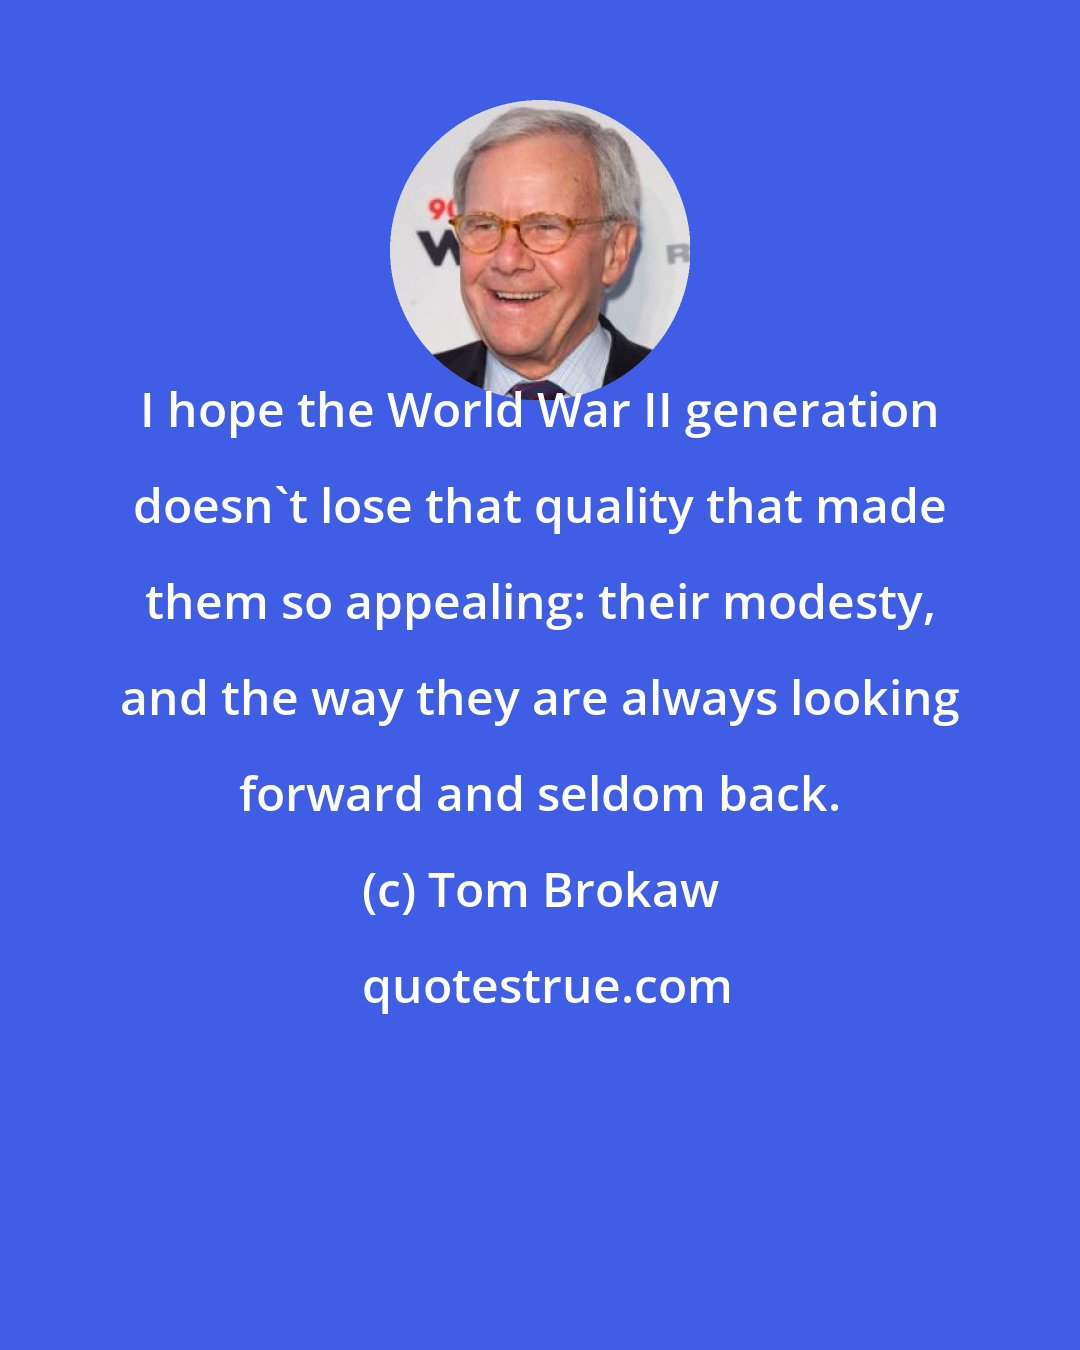 Tom Brokaw: I hope the World War II generation doesn't lose that quality that made them so appealing: their modesty, and the way they are always looking forward and seldom back.